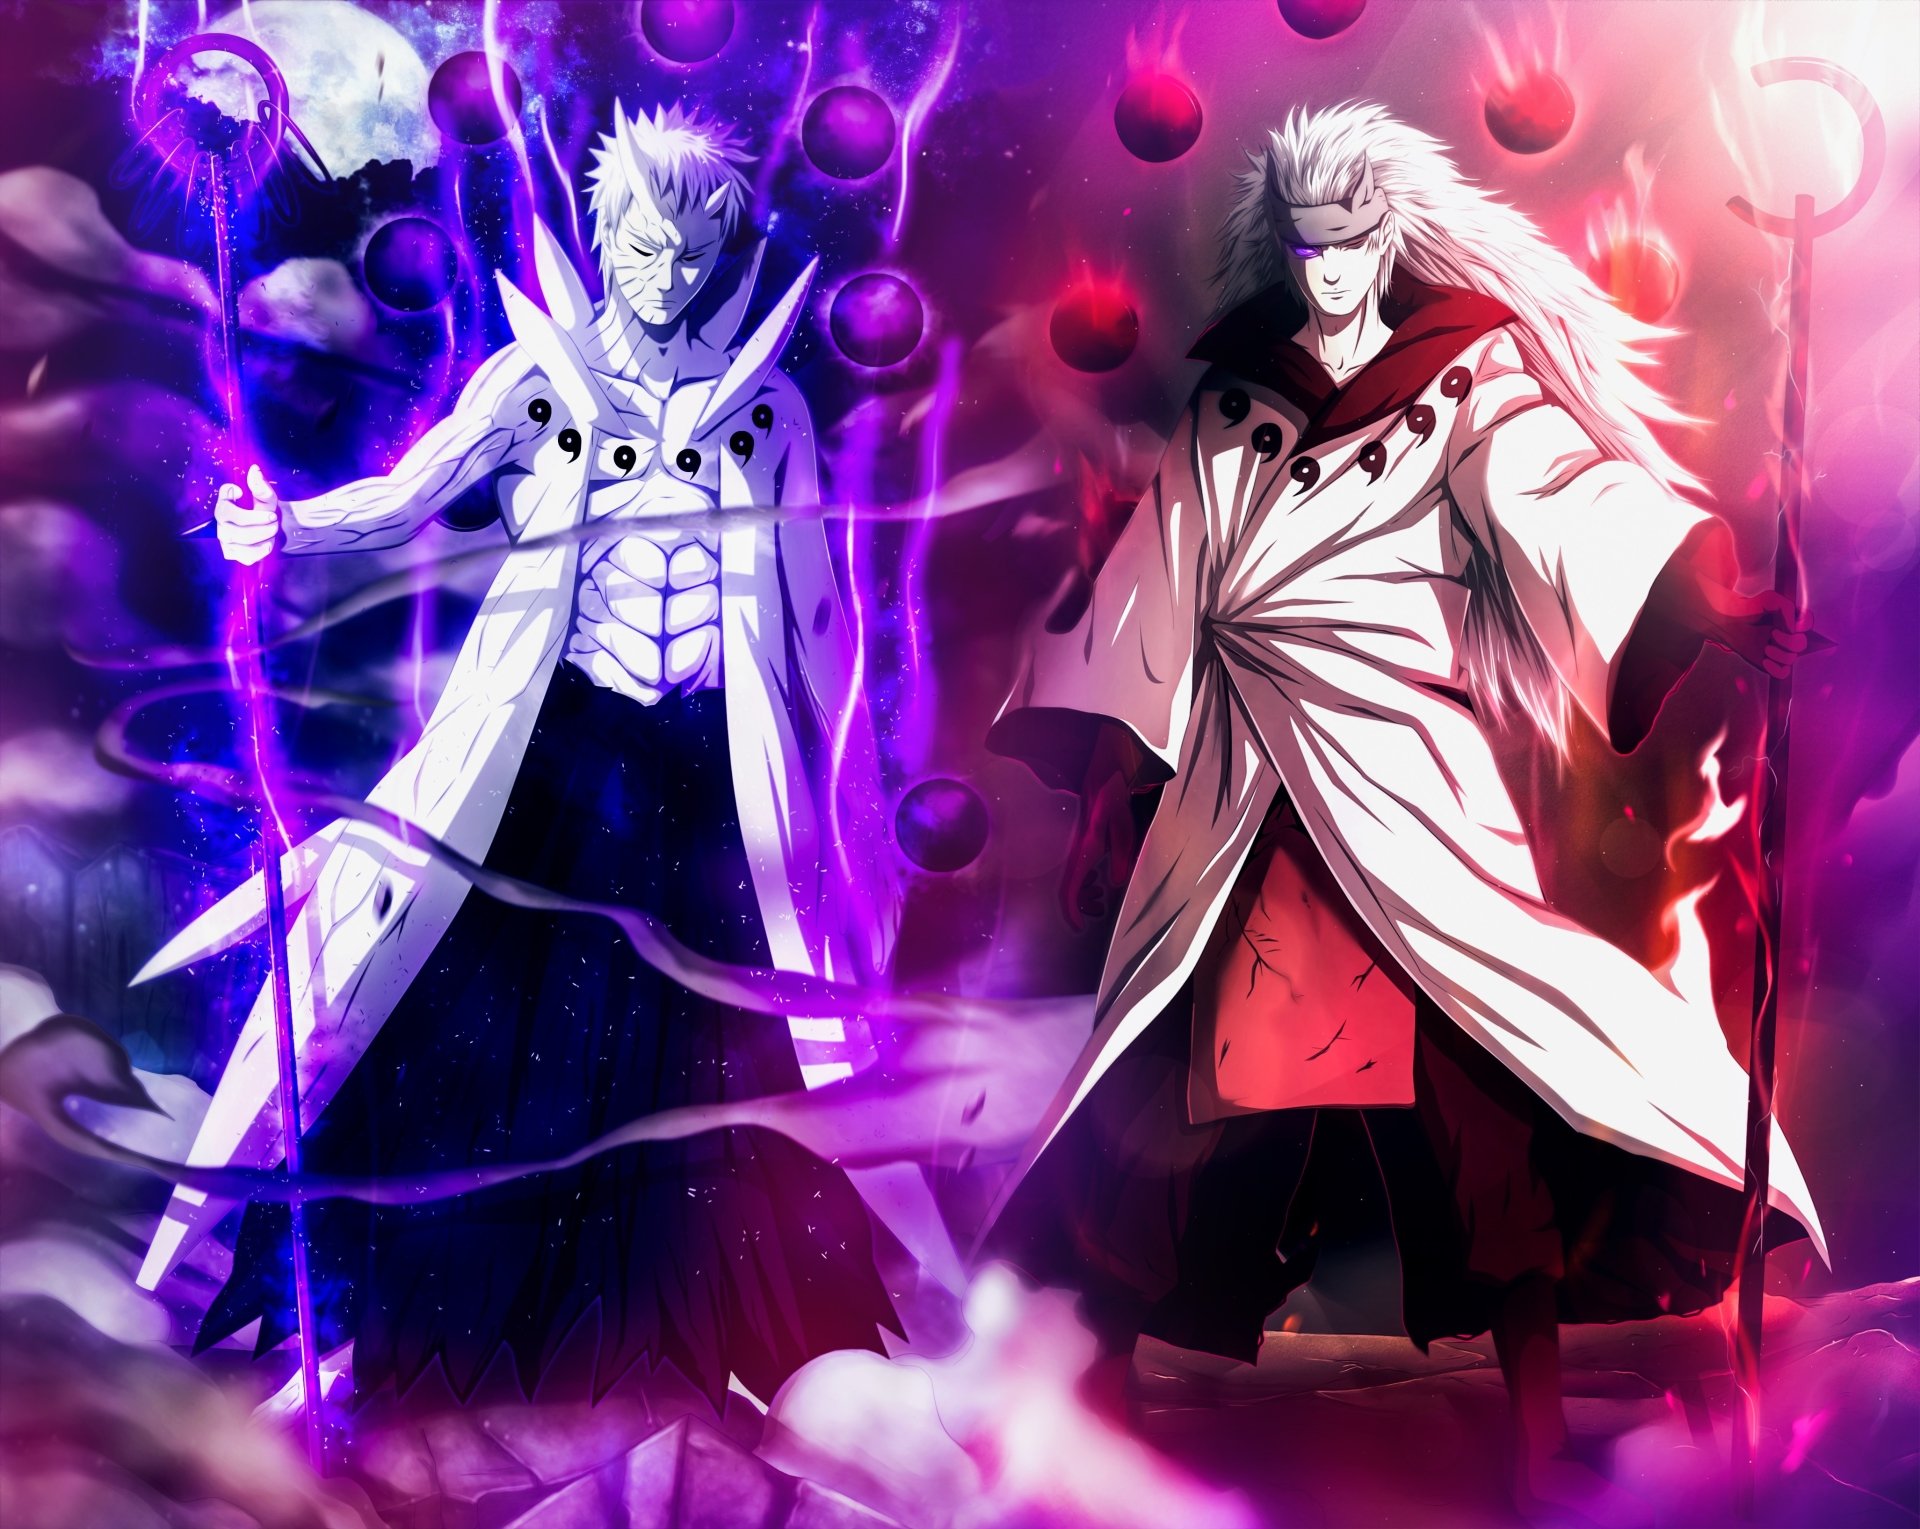 Free download Obito and Madara Uchiha Sage Of Six Paths 4k Ultra HD Wallpaper [4105x3268] for your Desktop, Mobile & Tablet. Explore Wallpaper Obito. Obito Uchiha Wallpaper, Obito Wallpaper, Obito Wallpaper